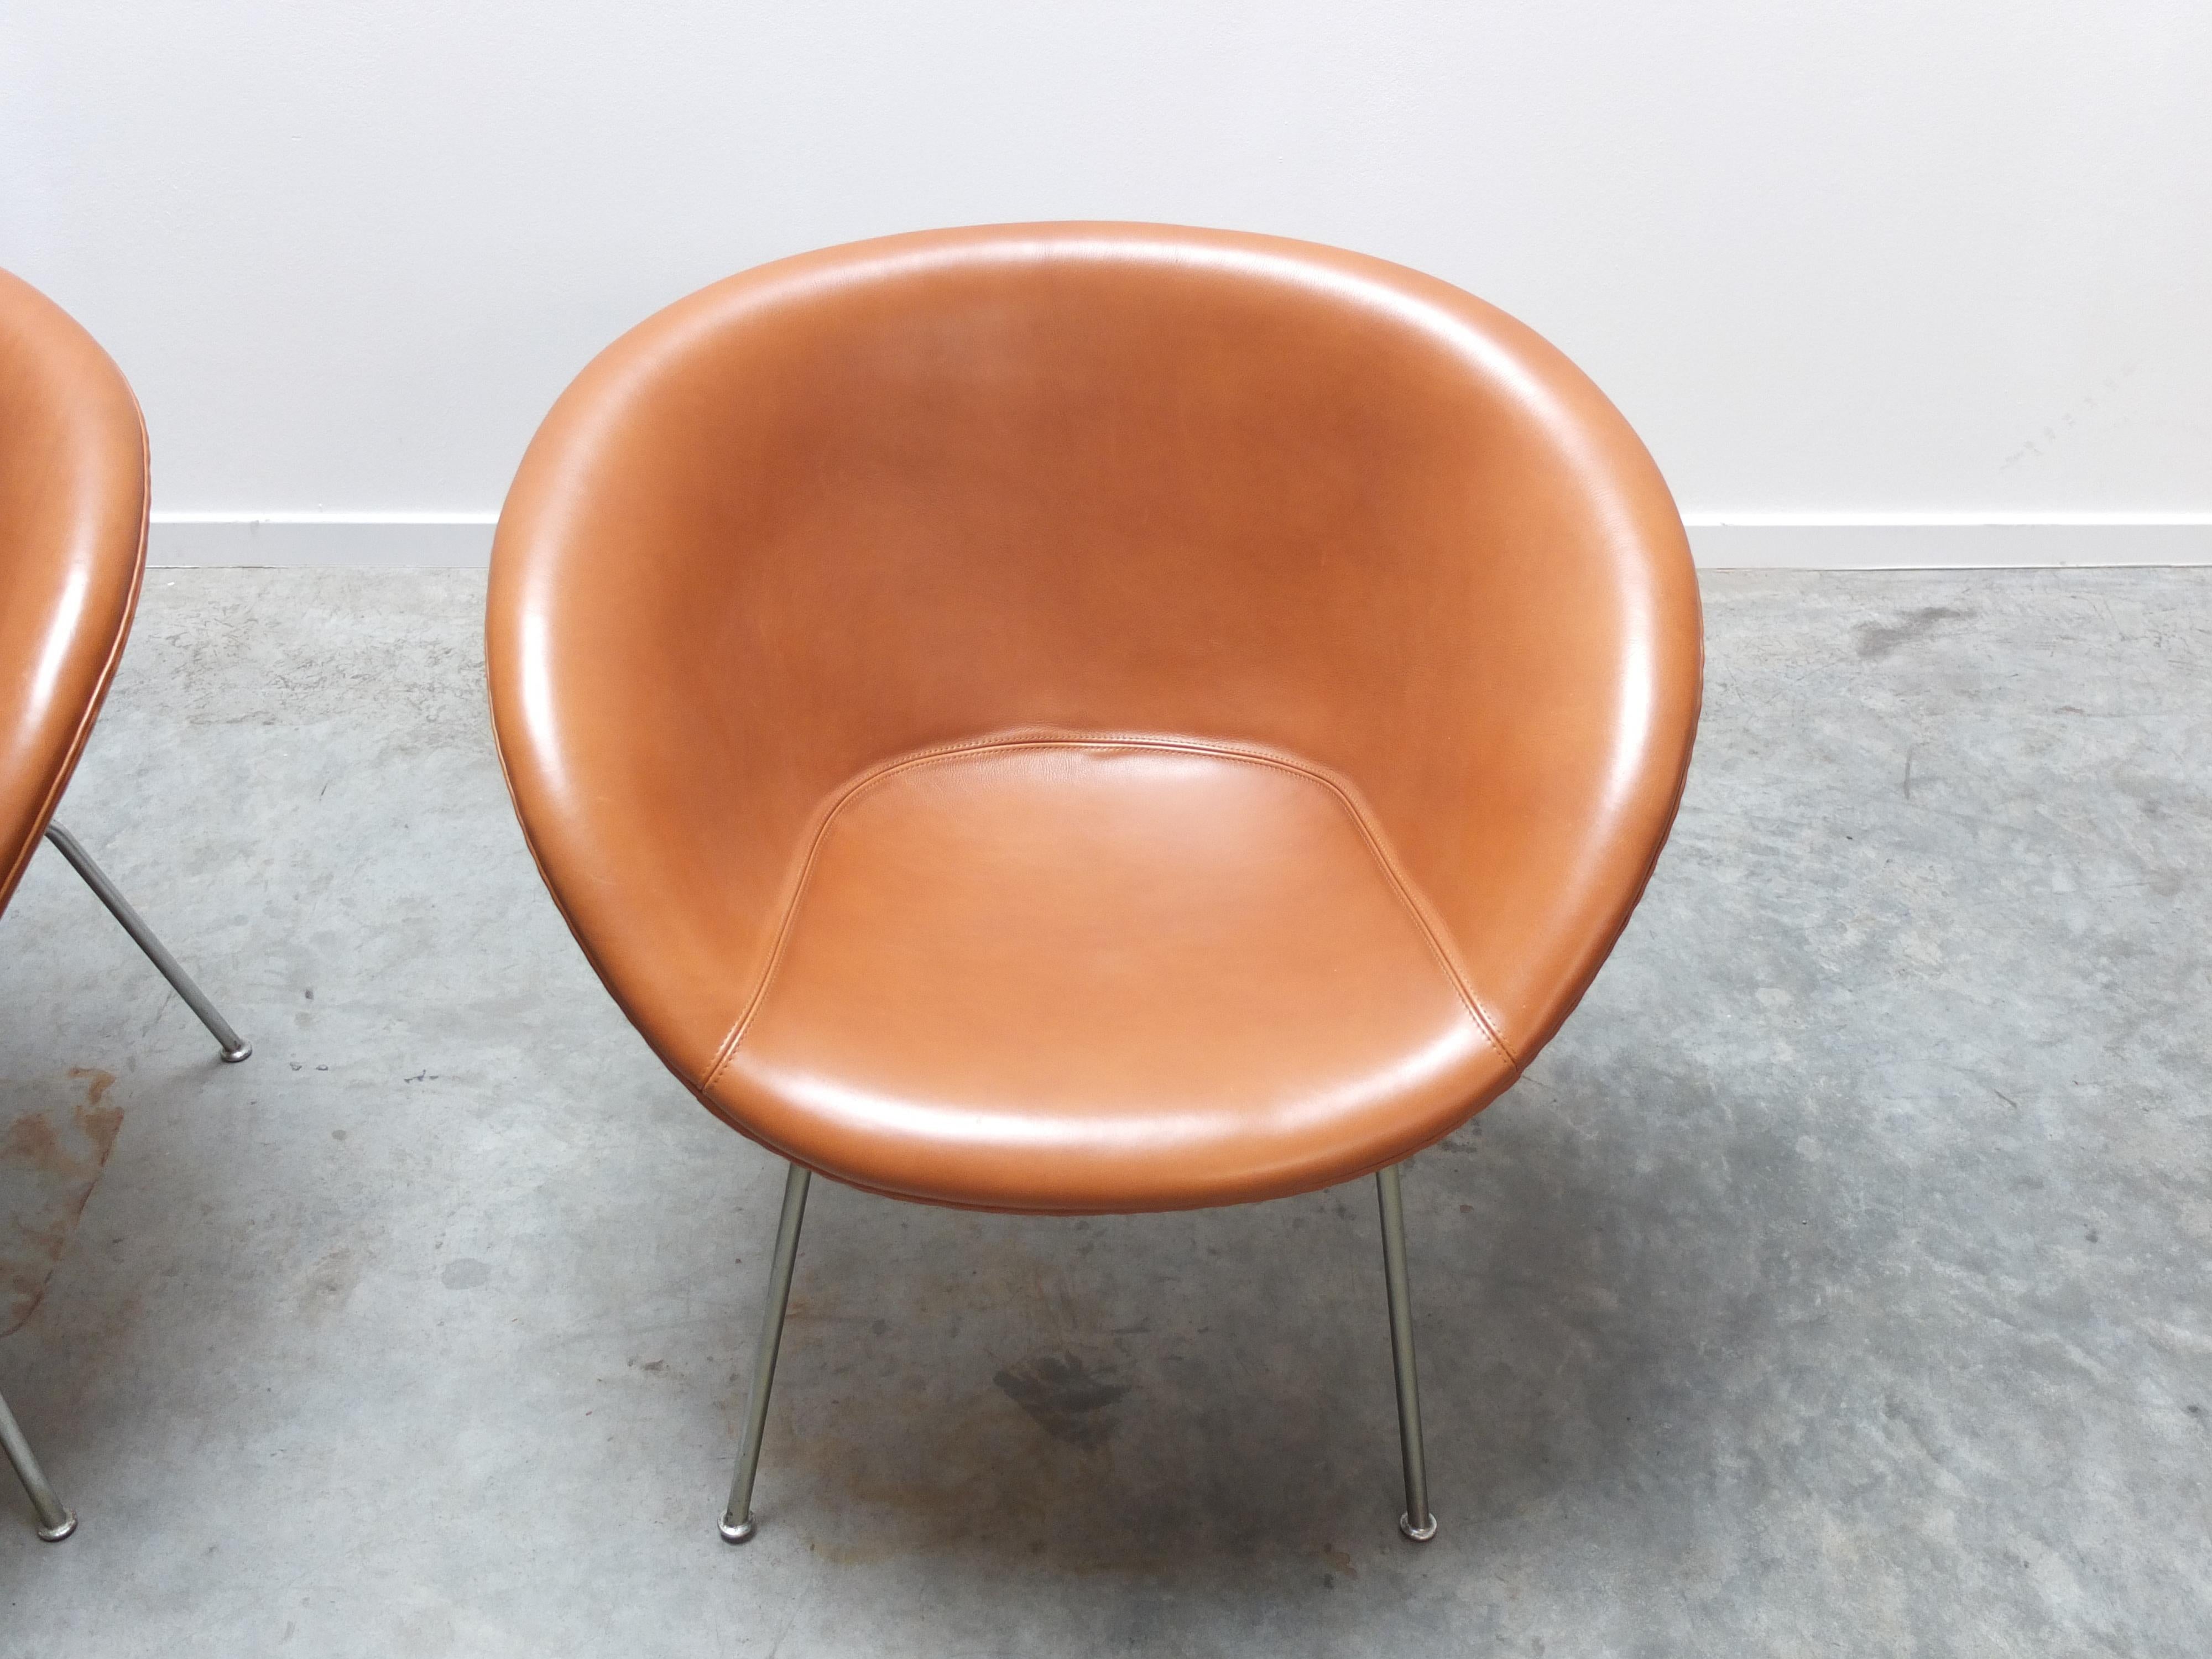 Metal Early Pair of 'Pot' Lounge Chairs by Arne Jacobsen for Fritz Hansen, 1950s For Sale